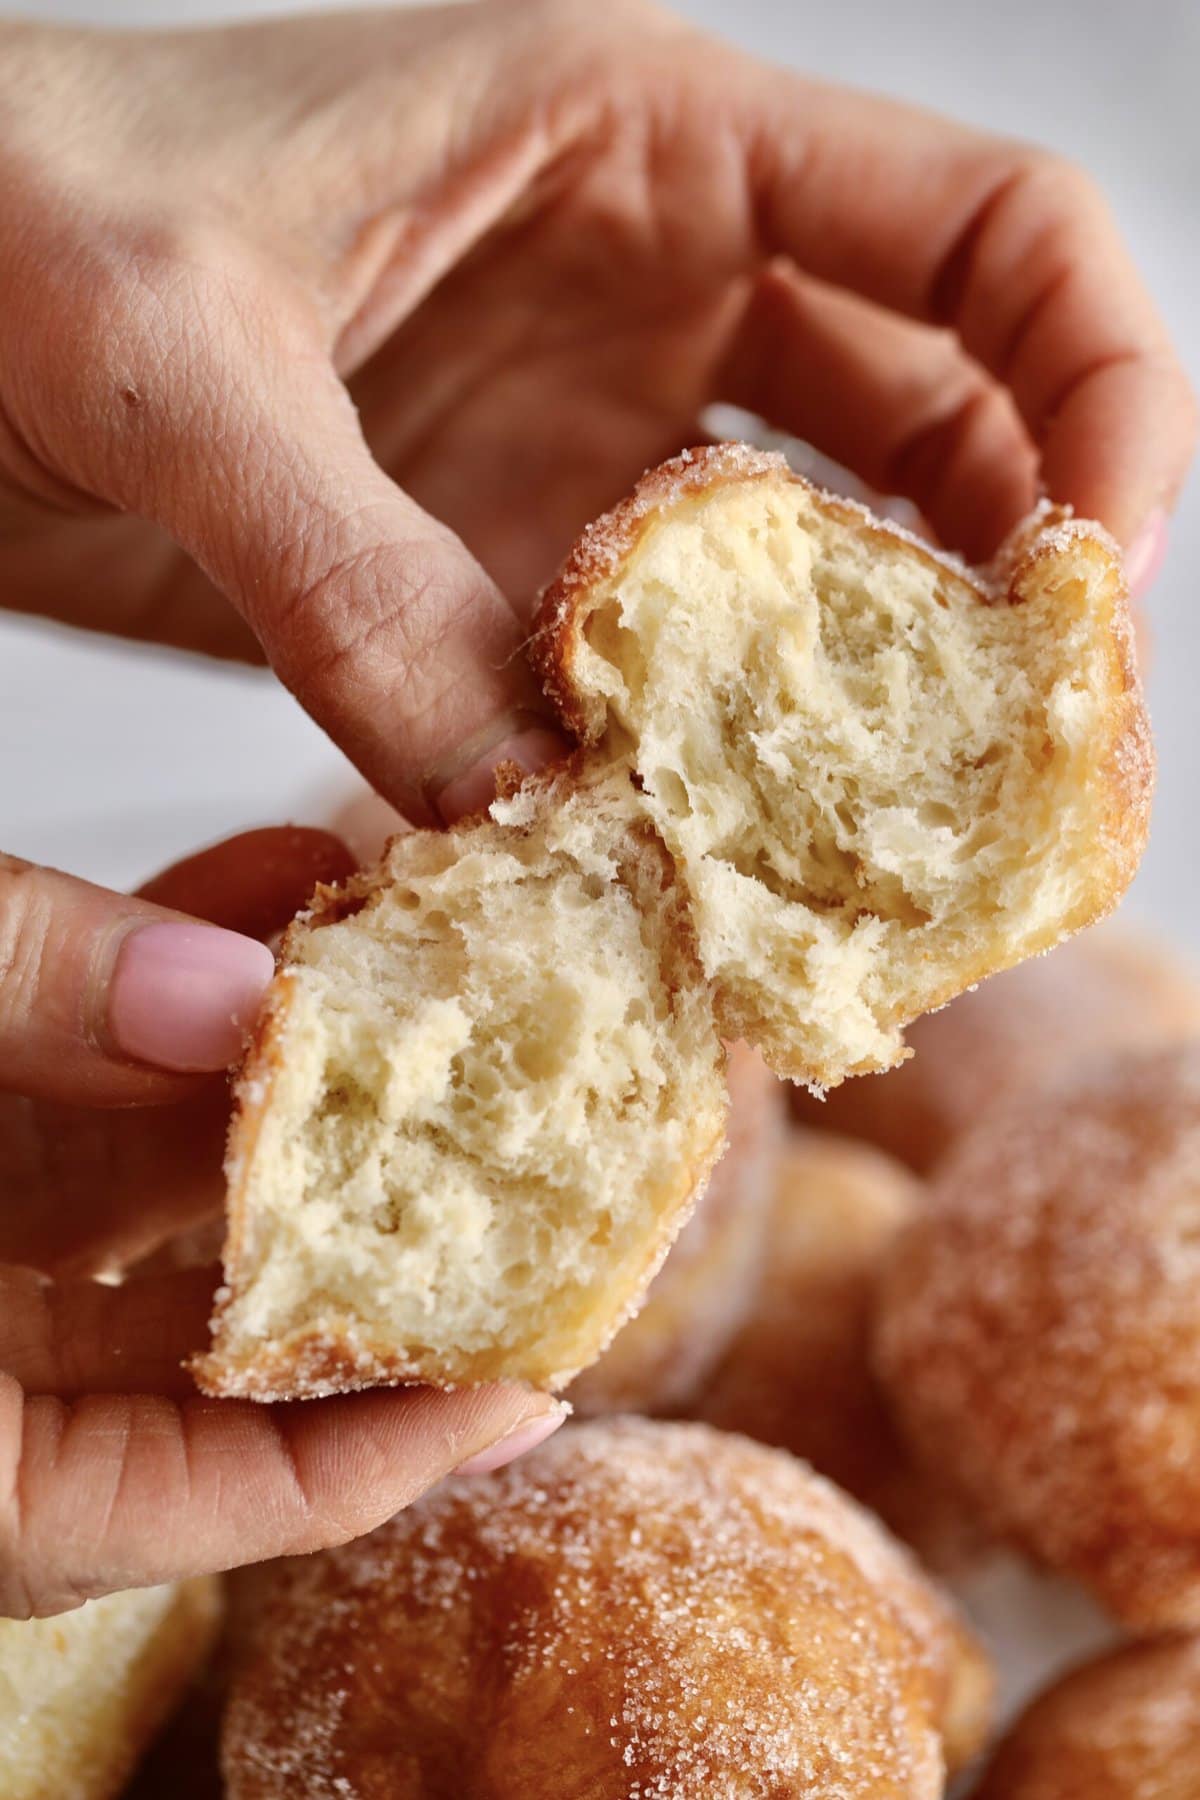 zeppole cut open to show soft and fluffy interior.